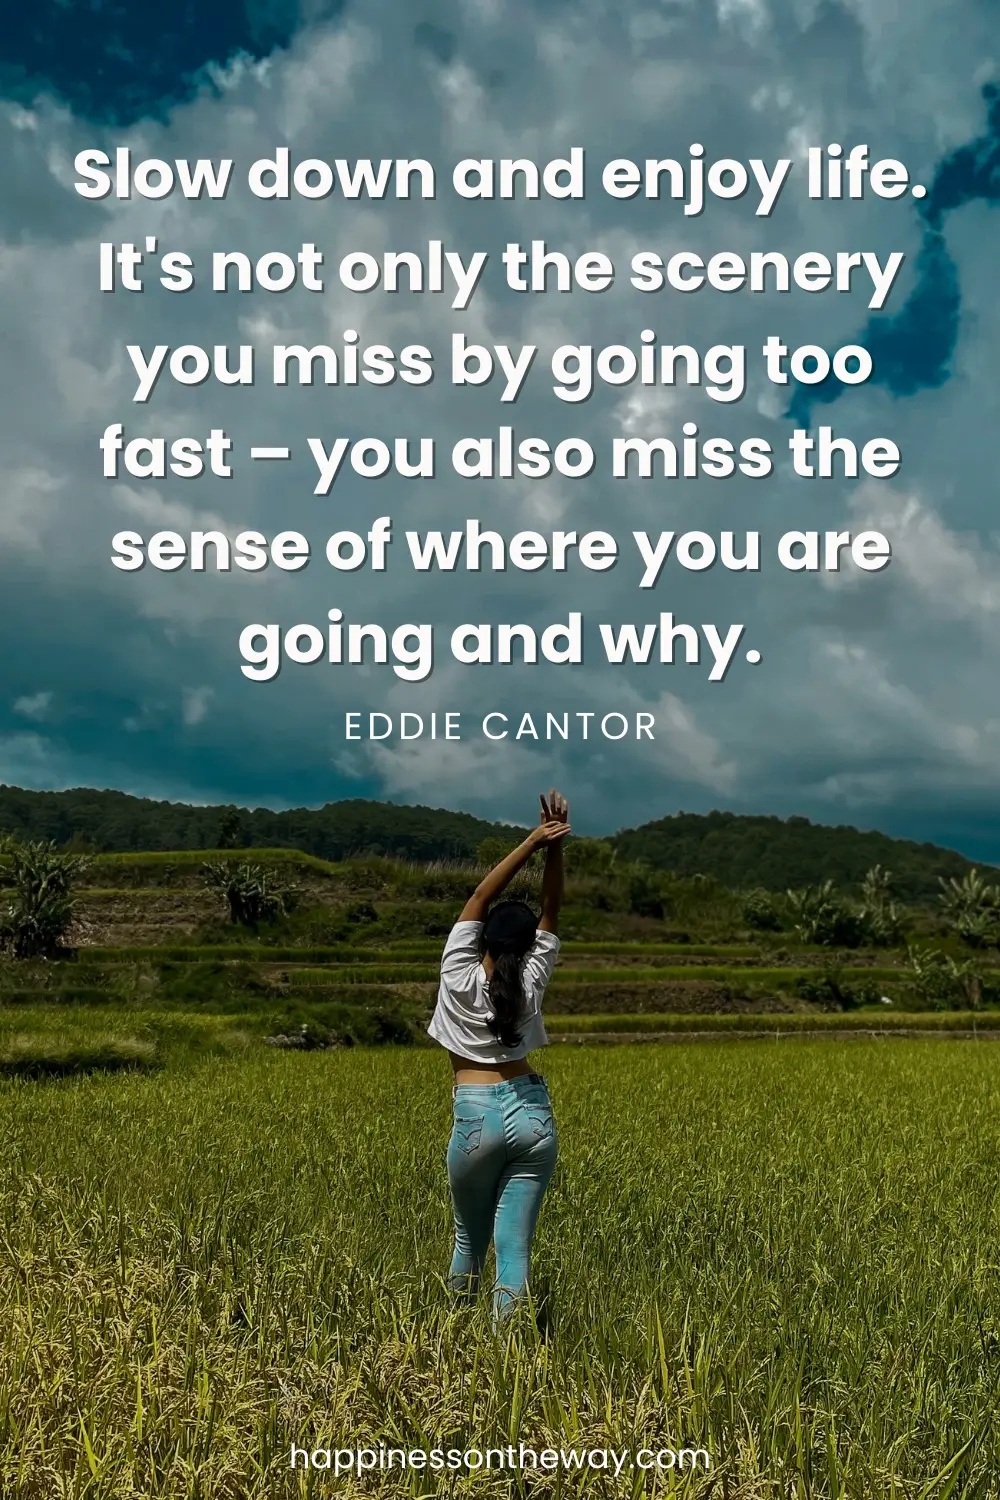 A person stands with raised arms amidst a lush green rice field under a dynamic sky, with the quote 'Slow down and enjoy life. It's not only the scenery you miss by going too fast – you also miss the sense of where you are going and why.' by Eddie Cantor